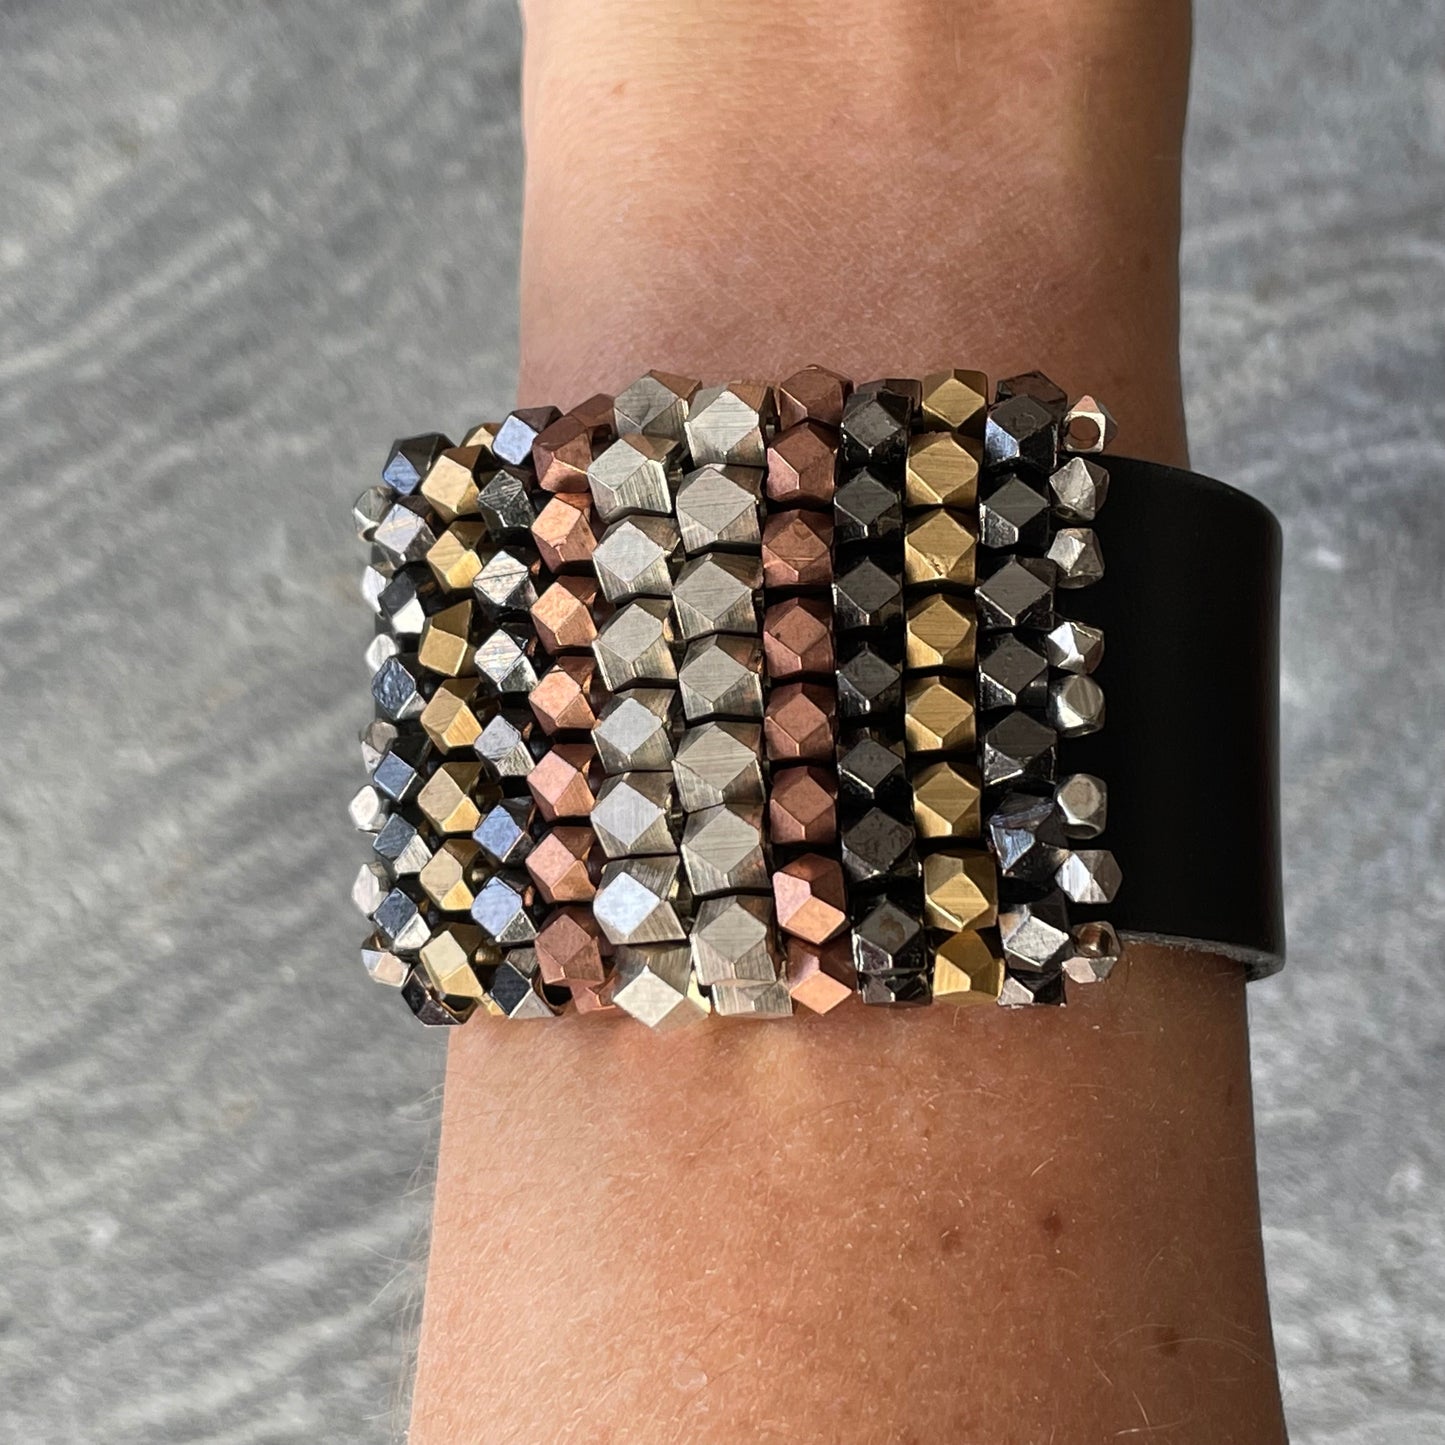 Faceted multi-Metal Beads on Black Leather